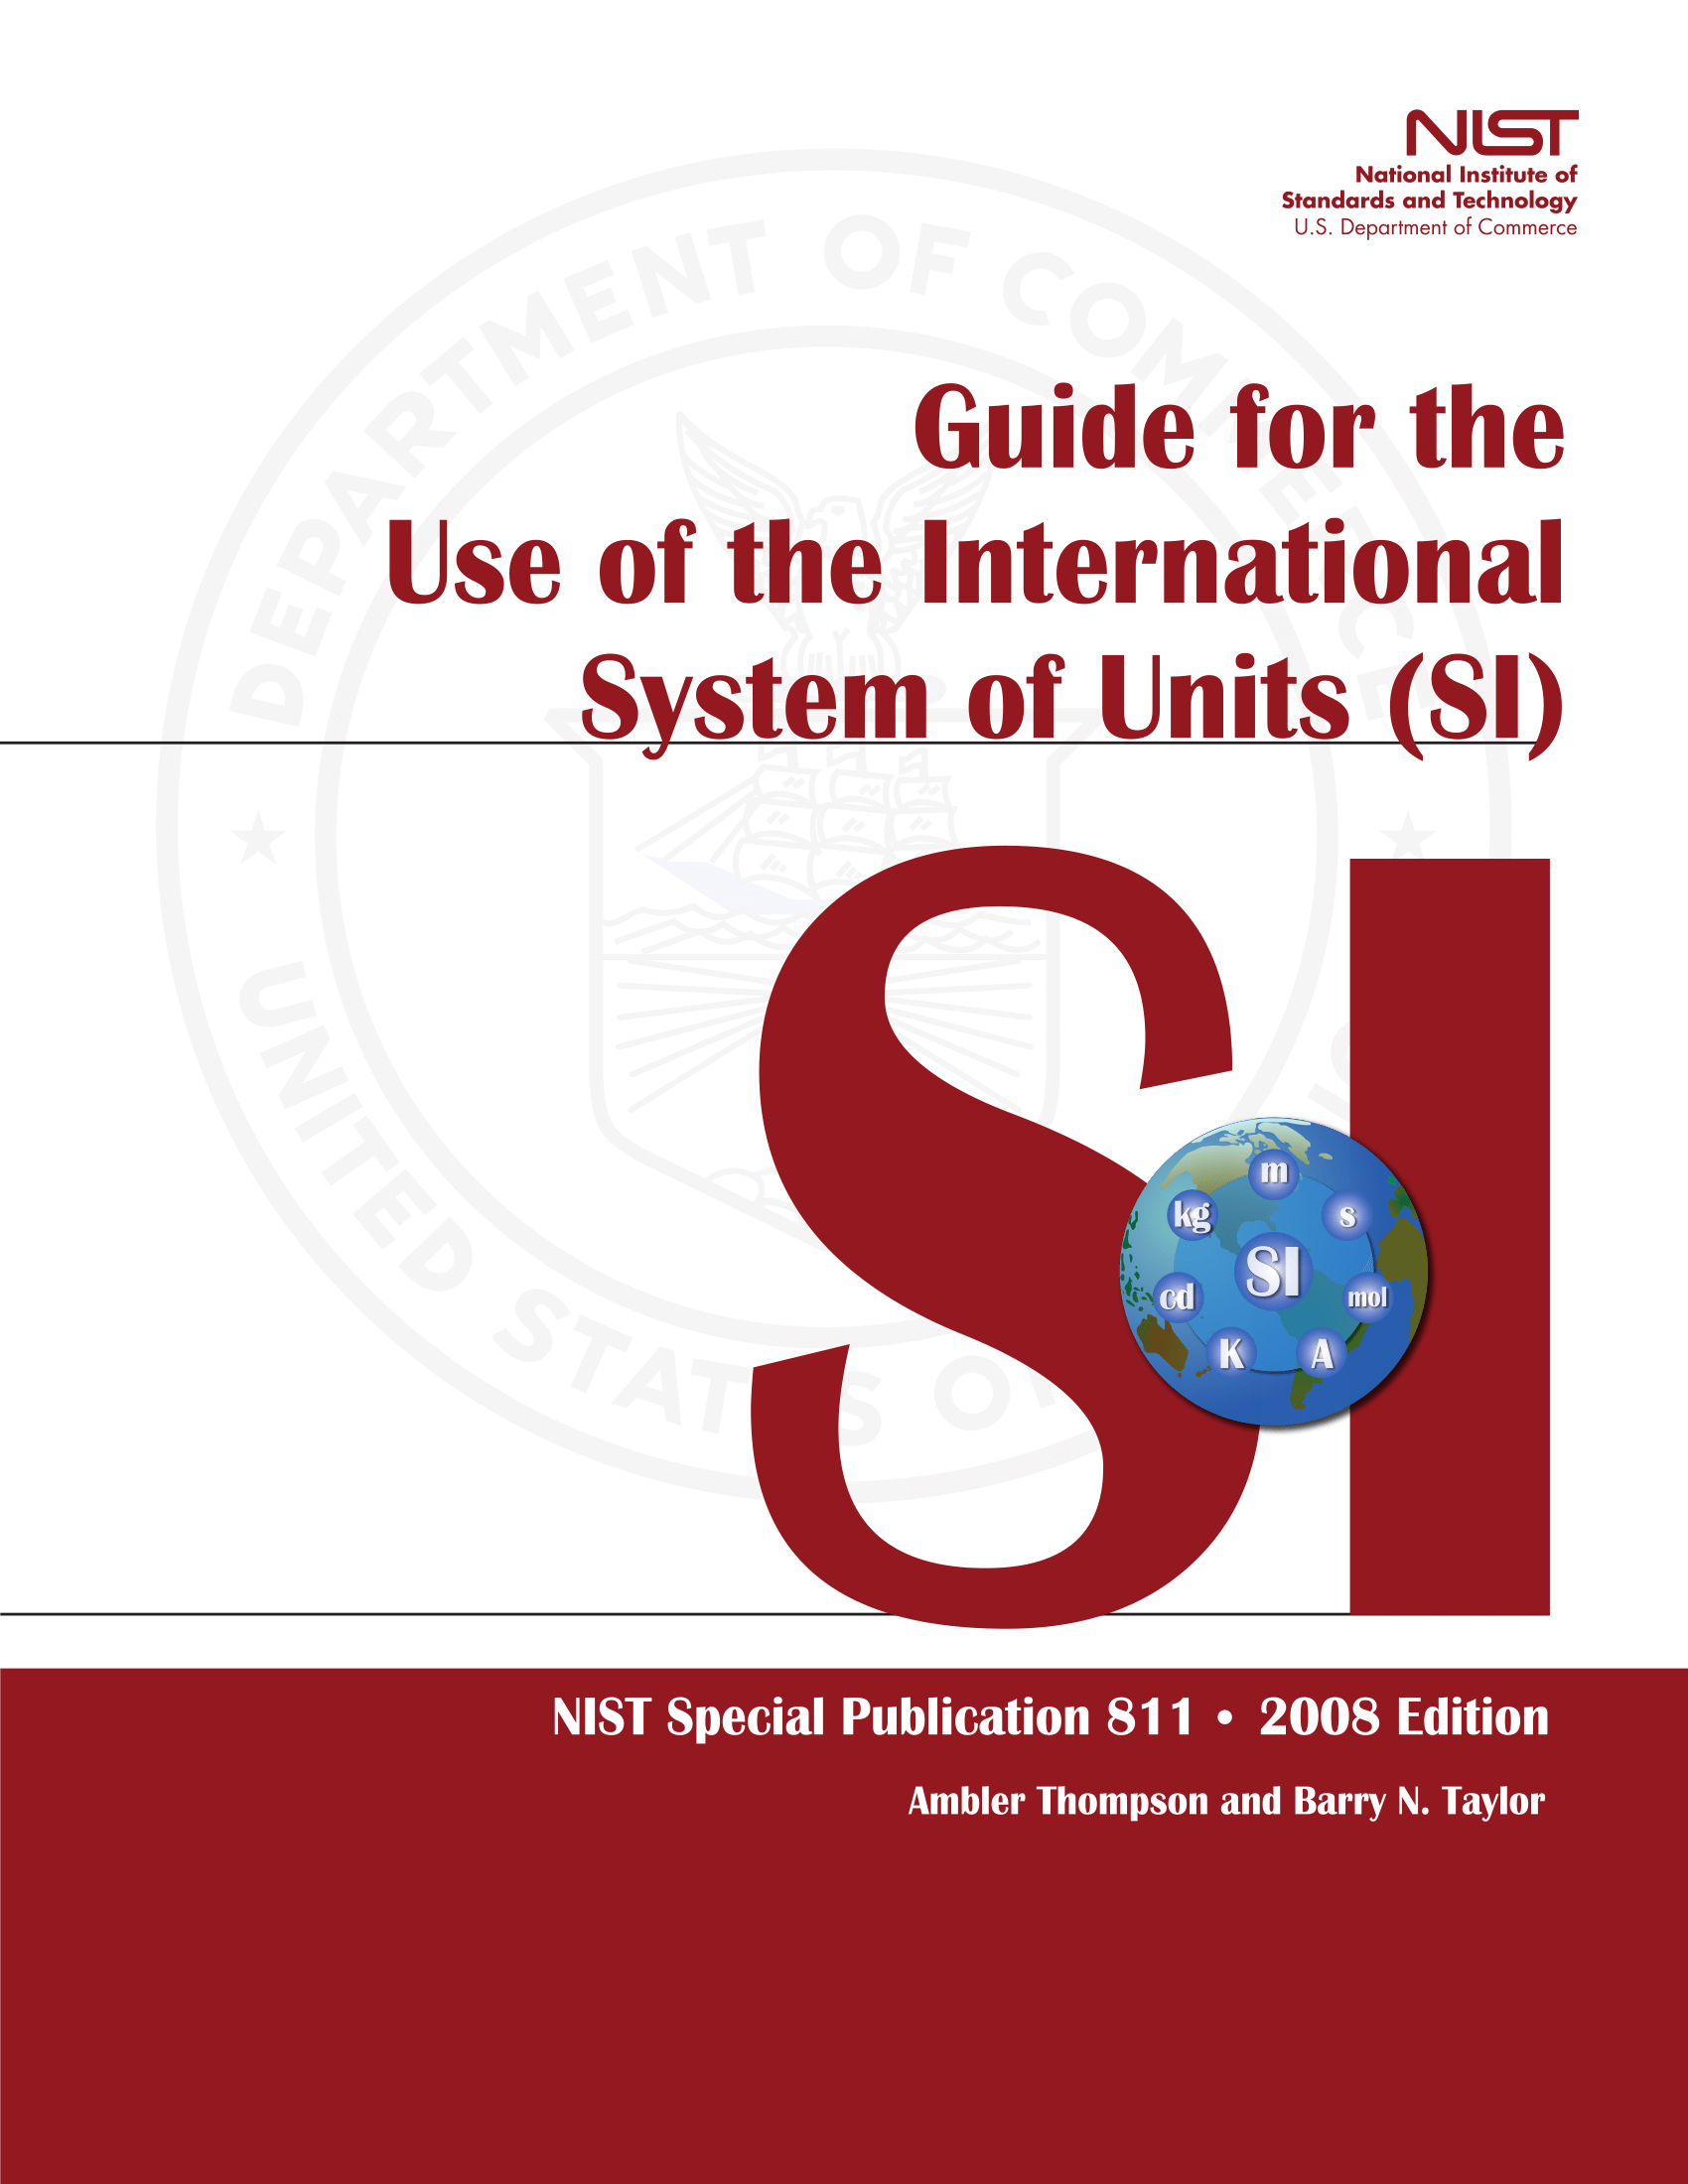 Guide_for_the_Use_of_the_International_System_of_Units-01